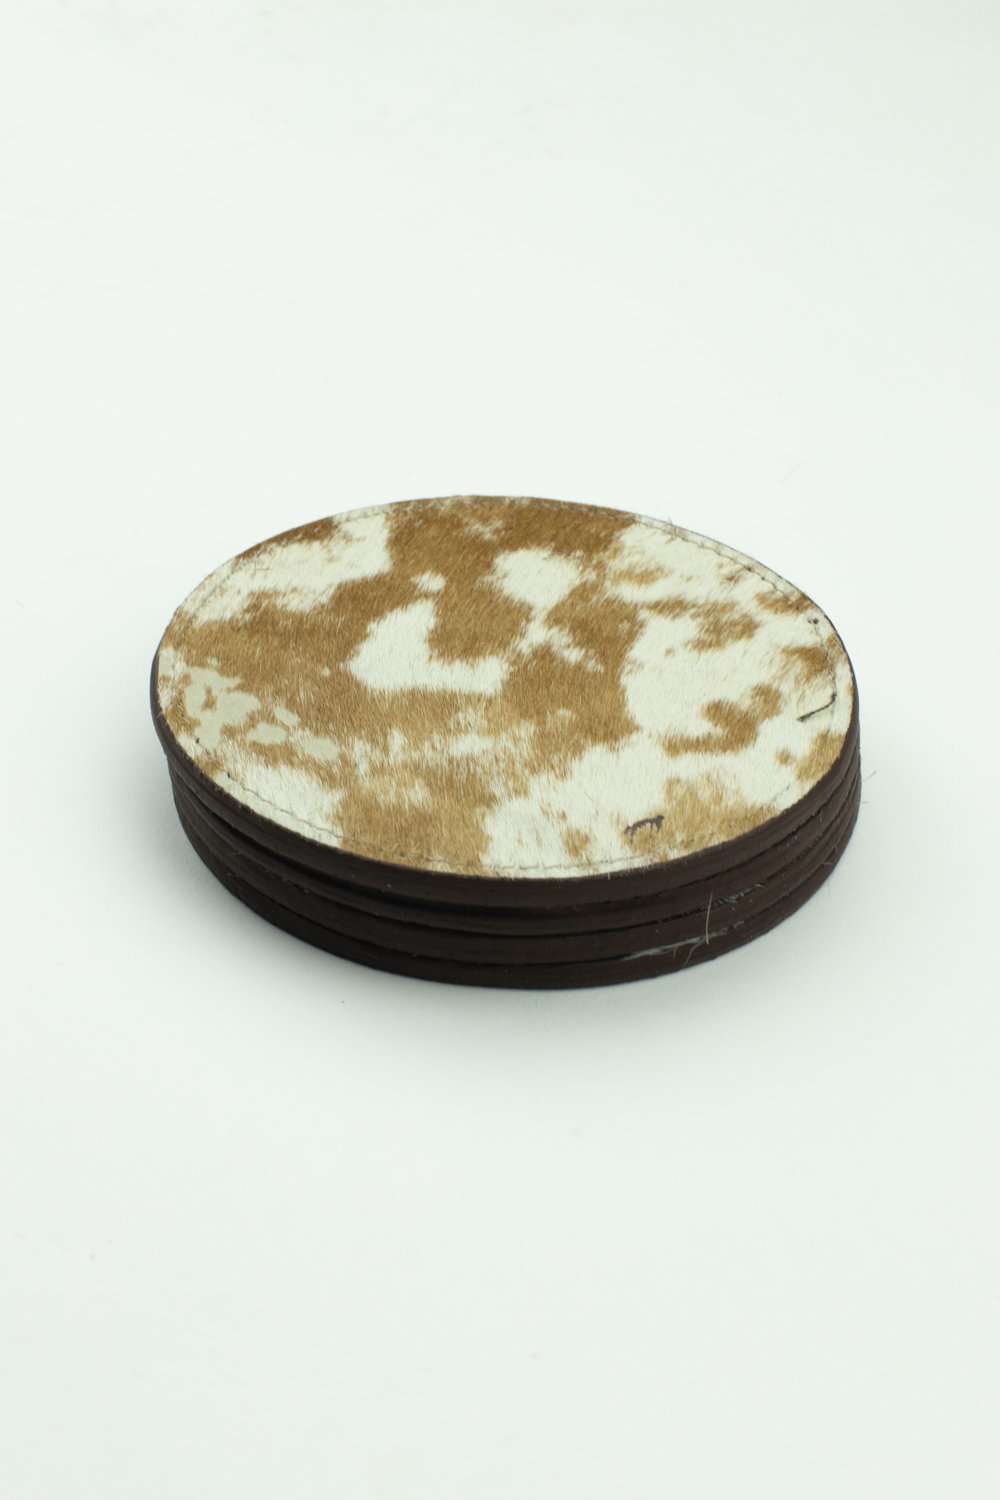 Spade Cowhide Coaster Assorted - Size 4.5 Inches - Genuine Cowhide Coa –  Artisan Cowhides